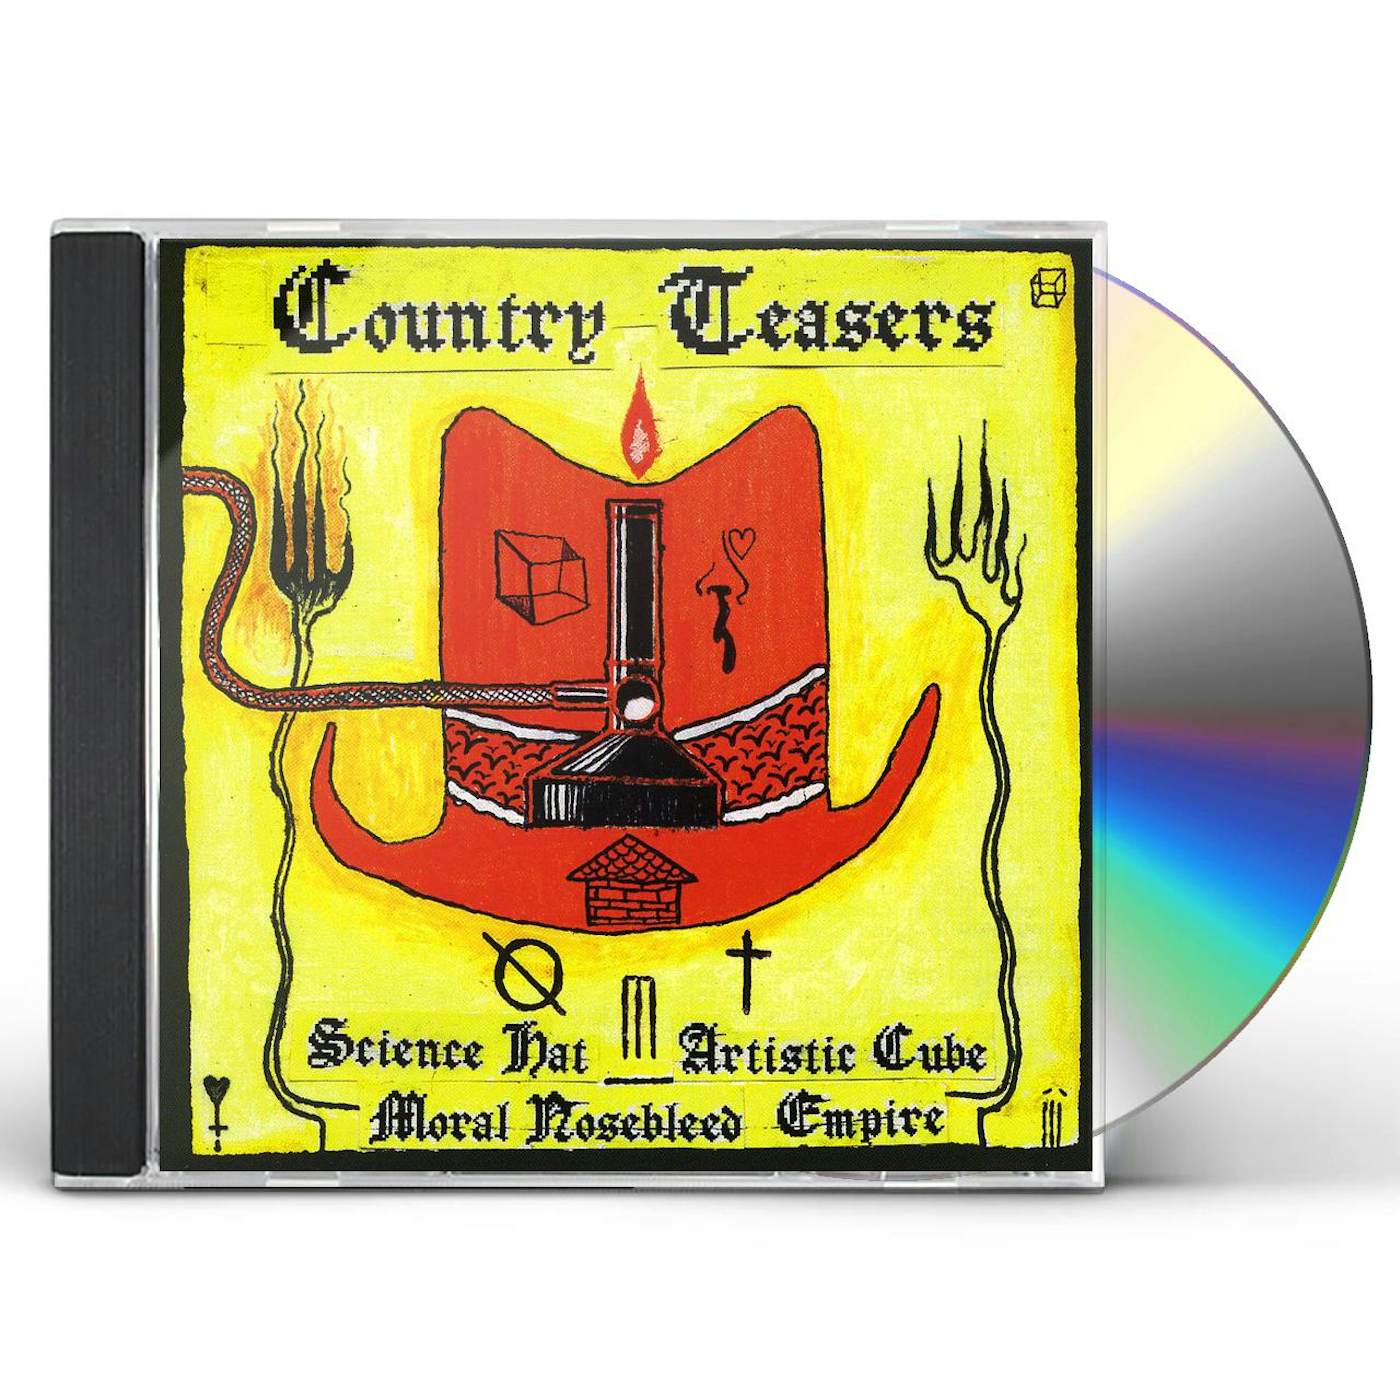 Country Teasers SCIENCE HAT ARTISTIC CUBE MORAL NOSEBLEED EMPIRE CD